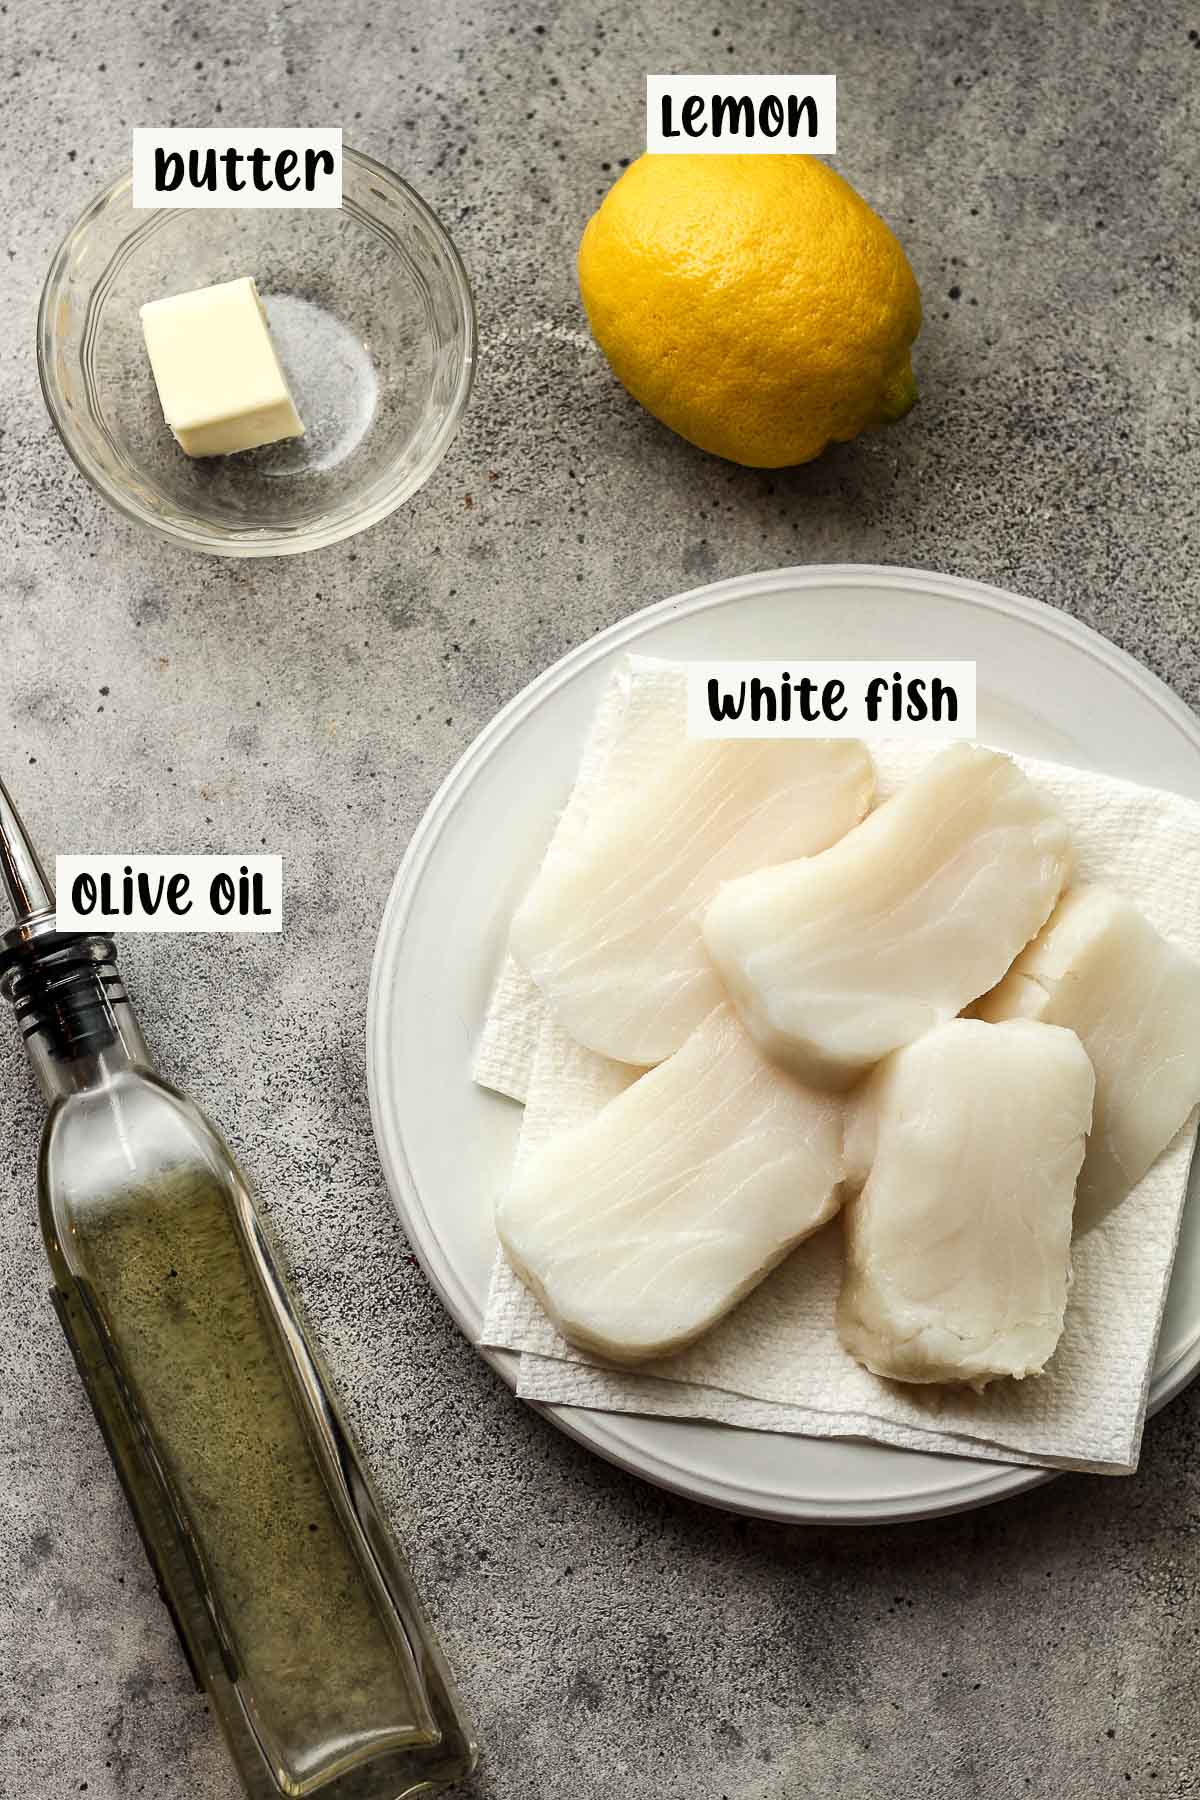 The labeled ingredients for the fish.